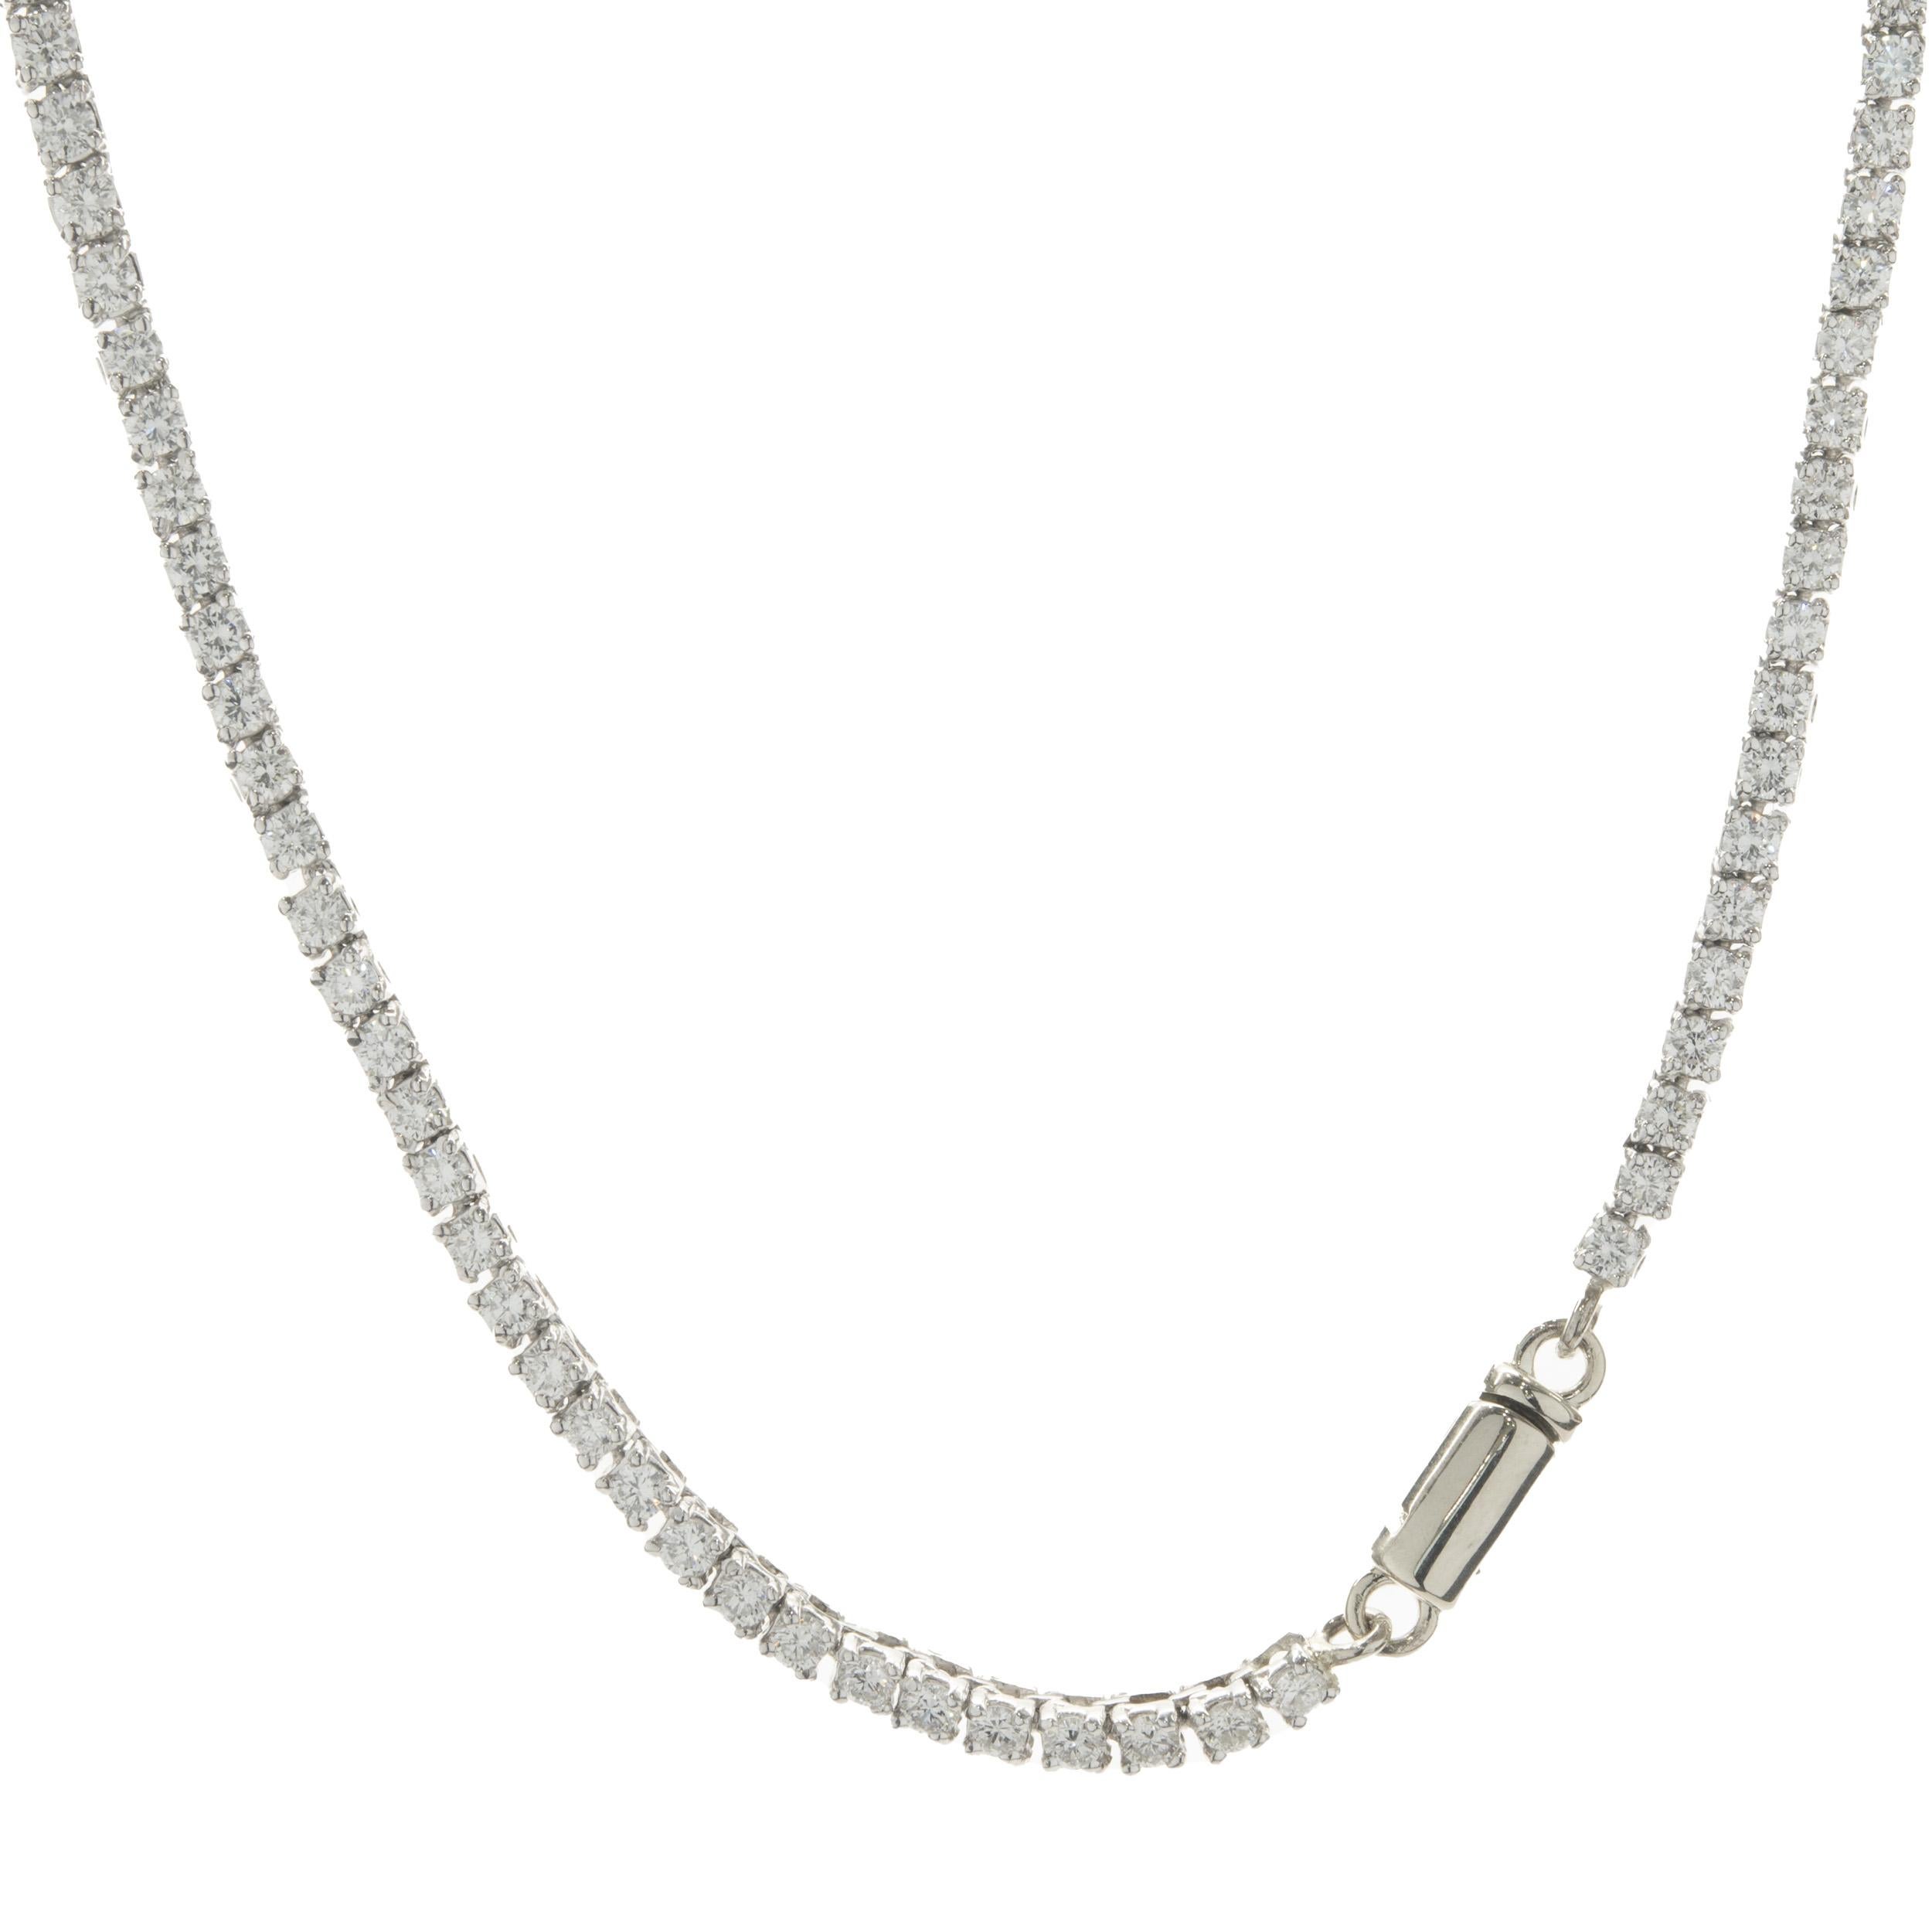 14 Karat White Gold Graduated Diamond Tennis Necklace In Excellent Condition For Sale In Scottsdale, AZ